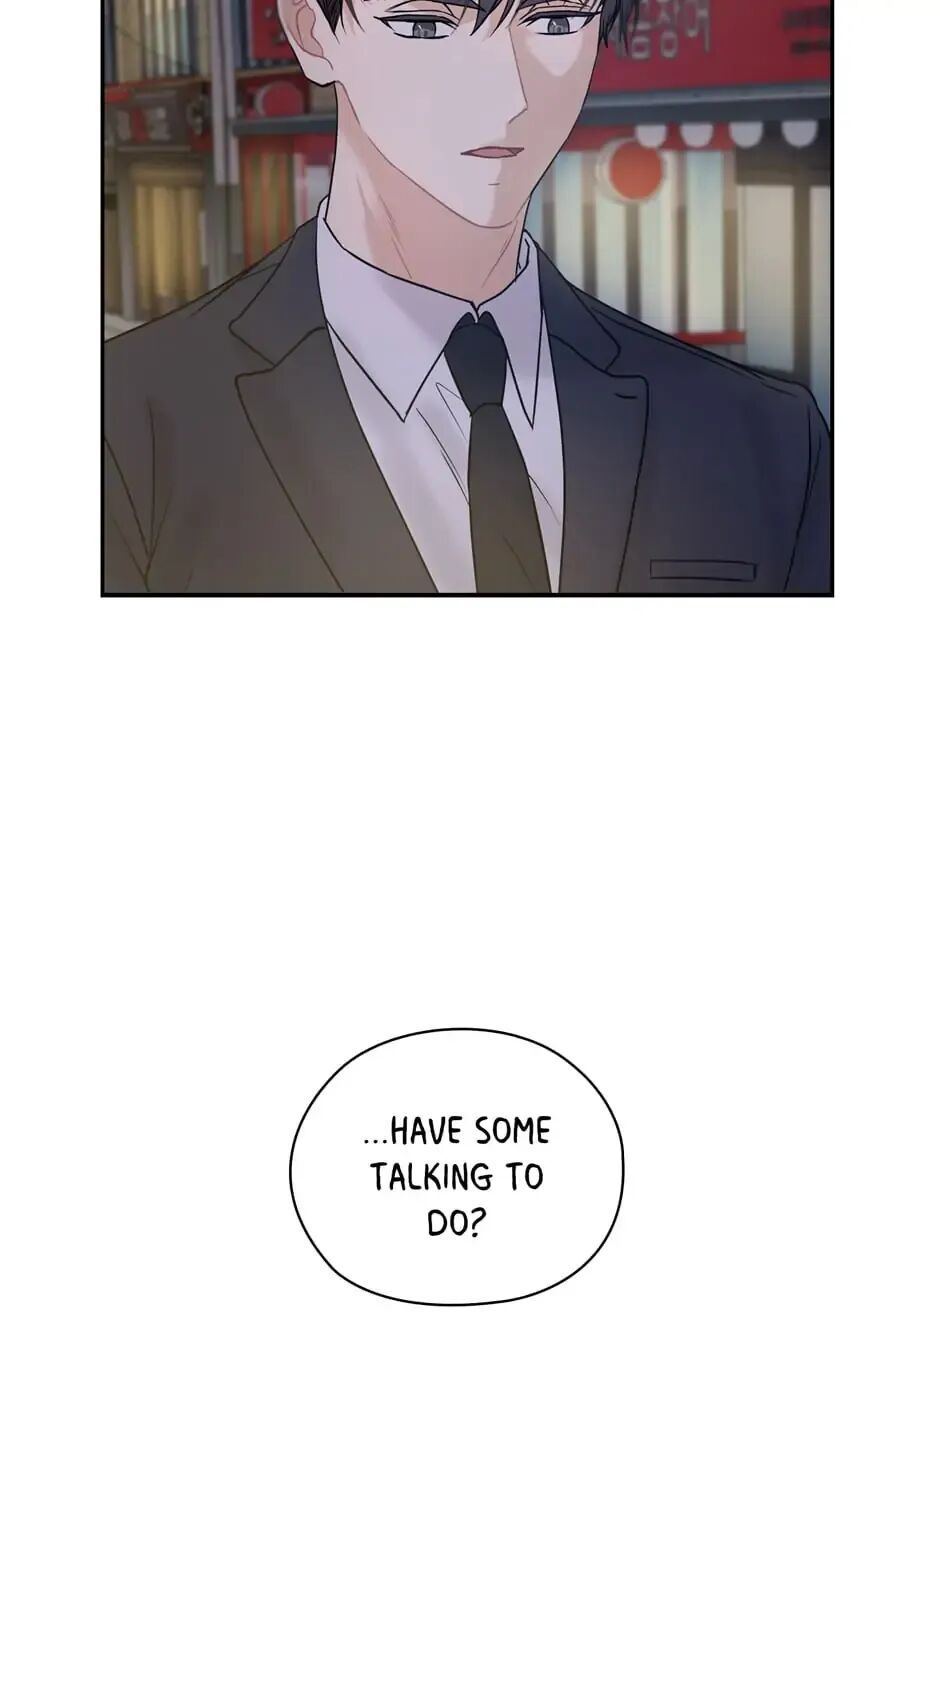 The Wicked Wife of a Scheming CEO Chapter 12 - HolyManga.net